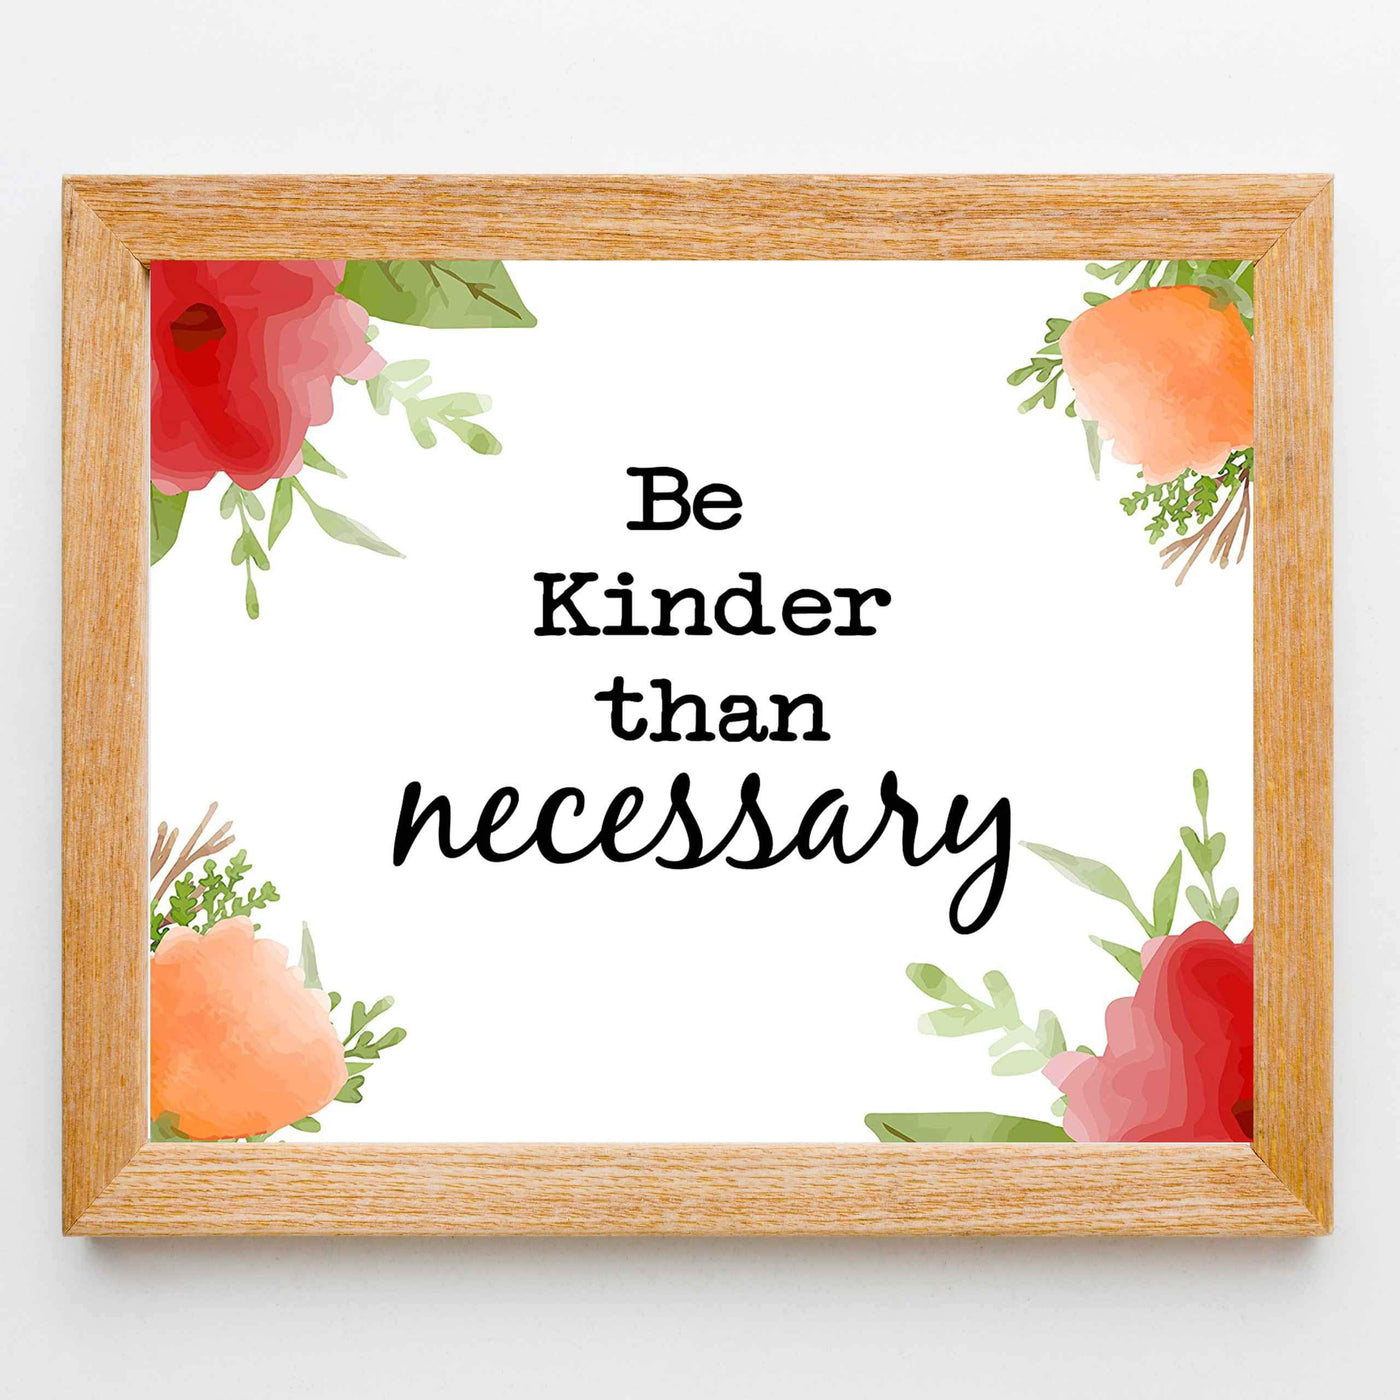 Be Kinder Than Necessary- Inspirational Wall Art- 10 x 8" Print Wall Decor-Ready to Frame. Modern Floral Typographic Print for Home-Office-School. Perfect Reminder to Be the Best You. A Great Gift!